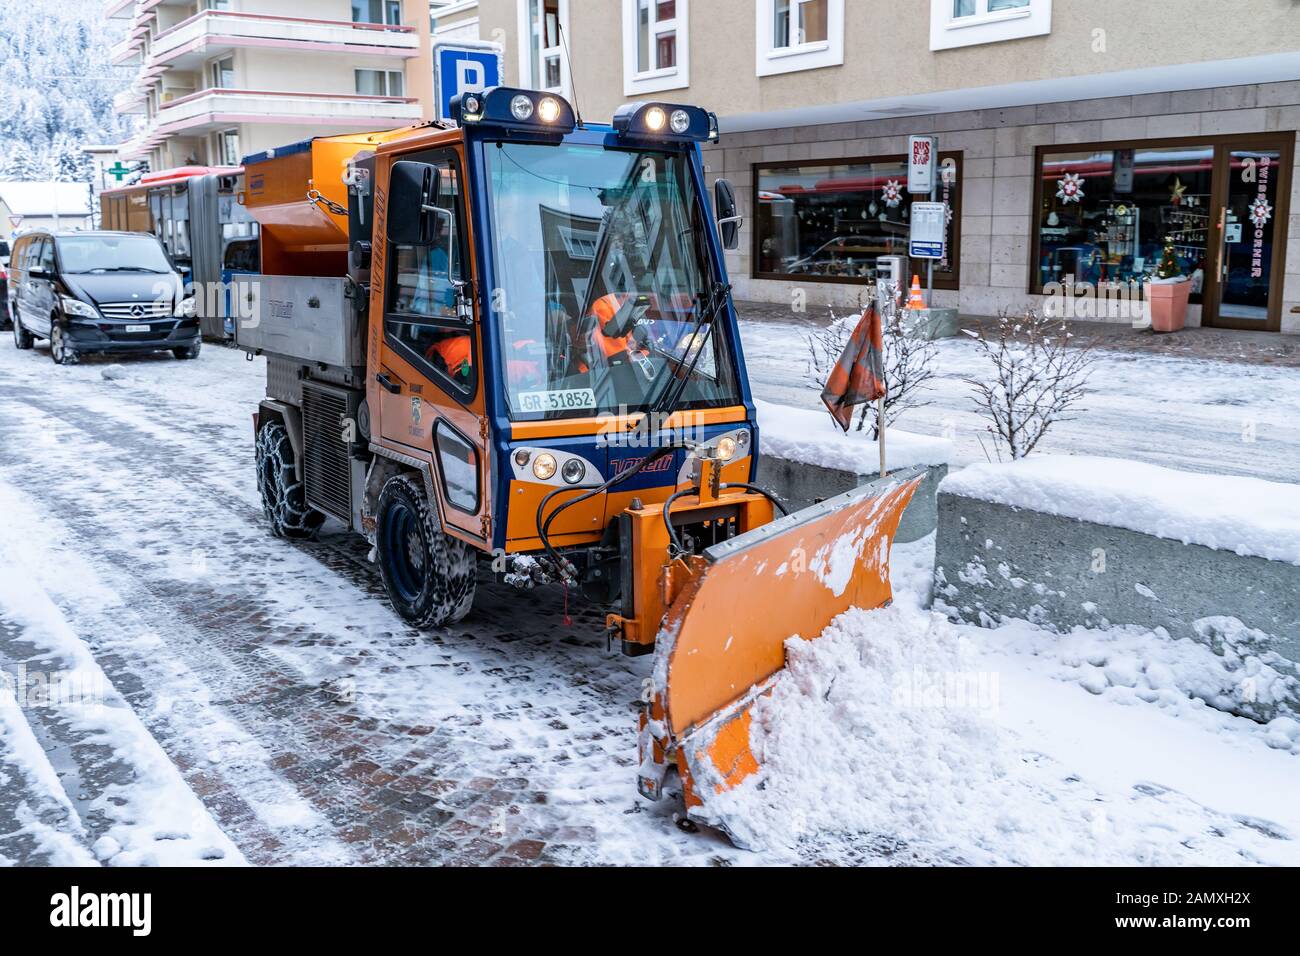 St. Moritz, Switzerland - 22 December 2019 - Snow clean up truck work to clear out snow from the road in St. Moritz, Switzerland on December 22, 2019 Stock Photo